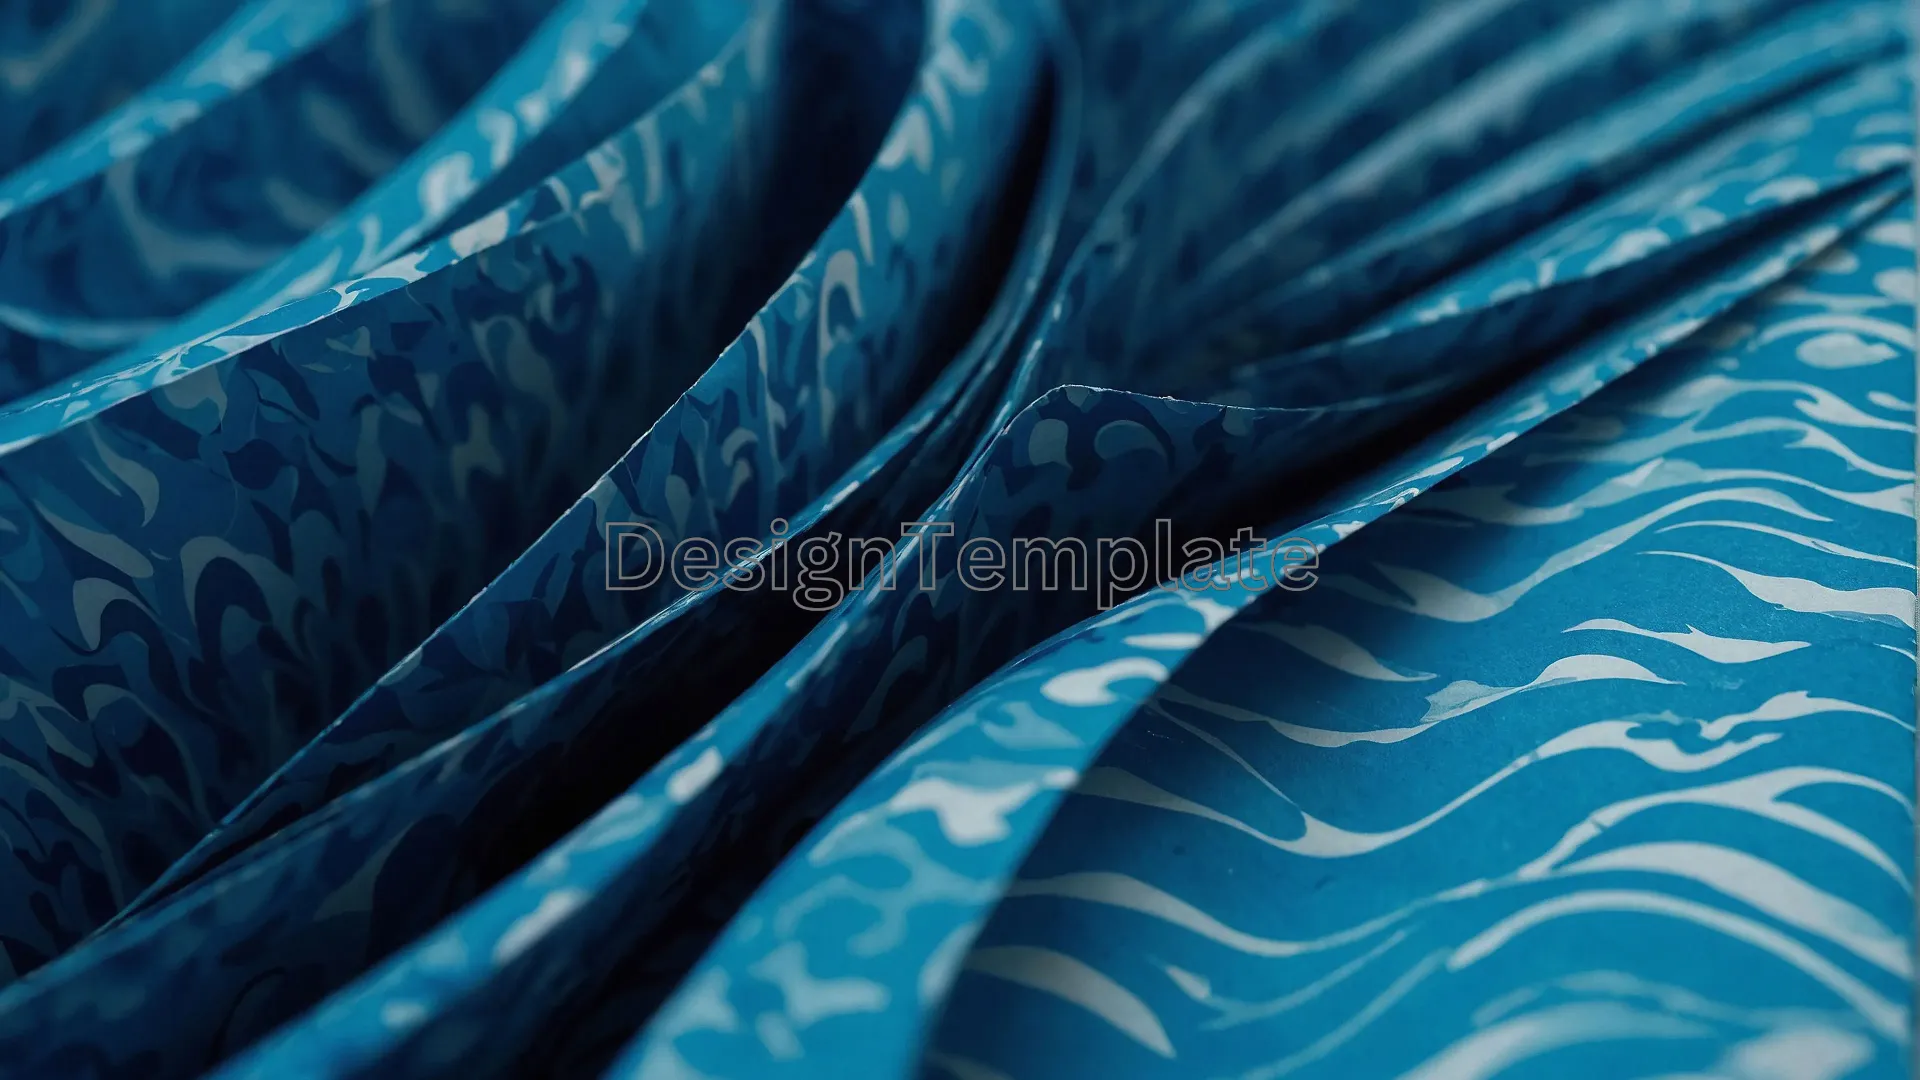 Blue Paper Crafted in Wavy Style Background Image image